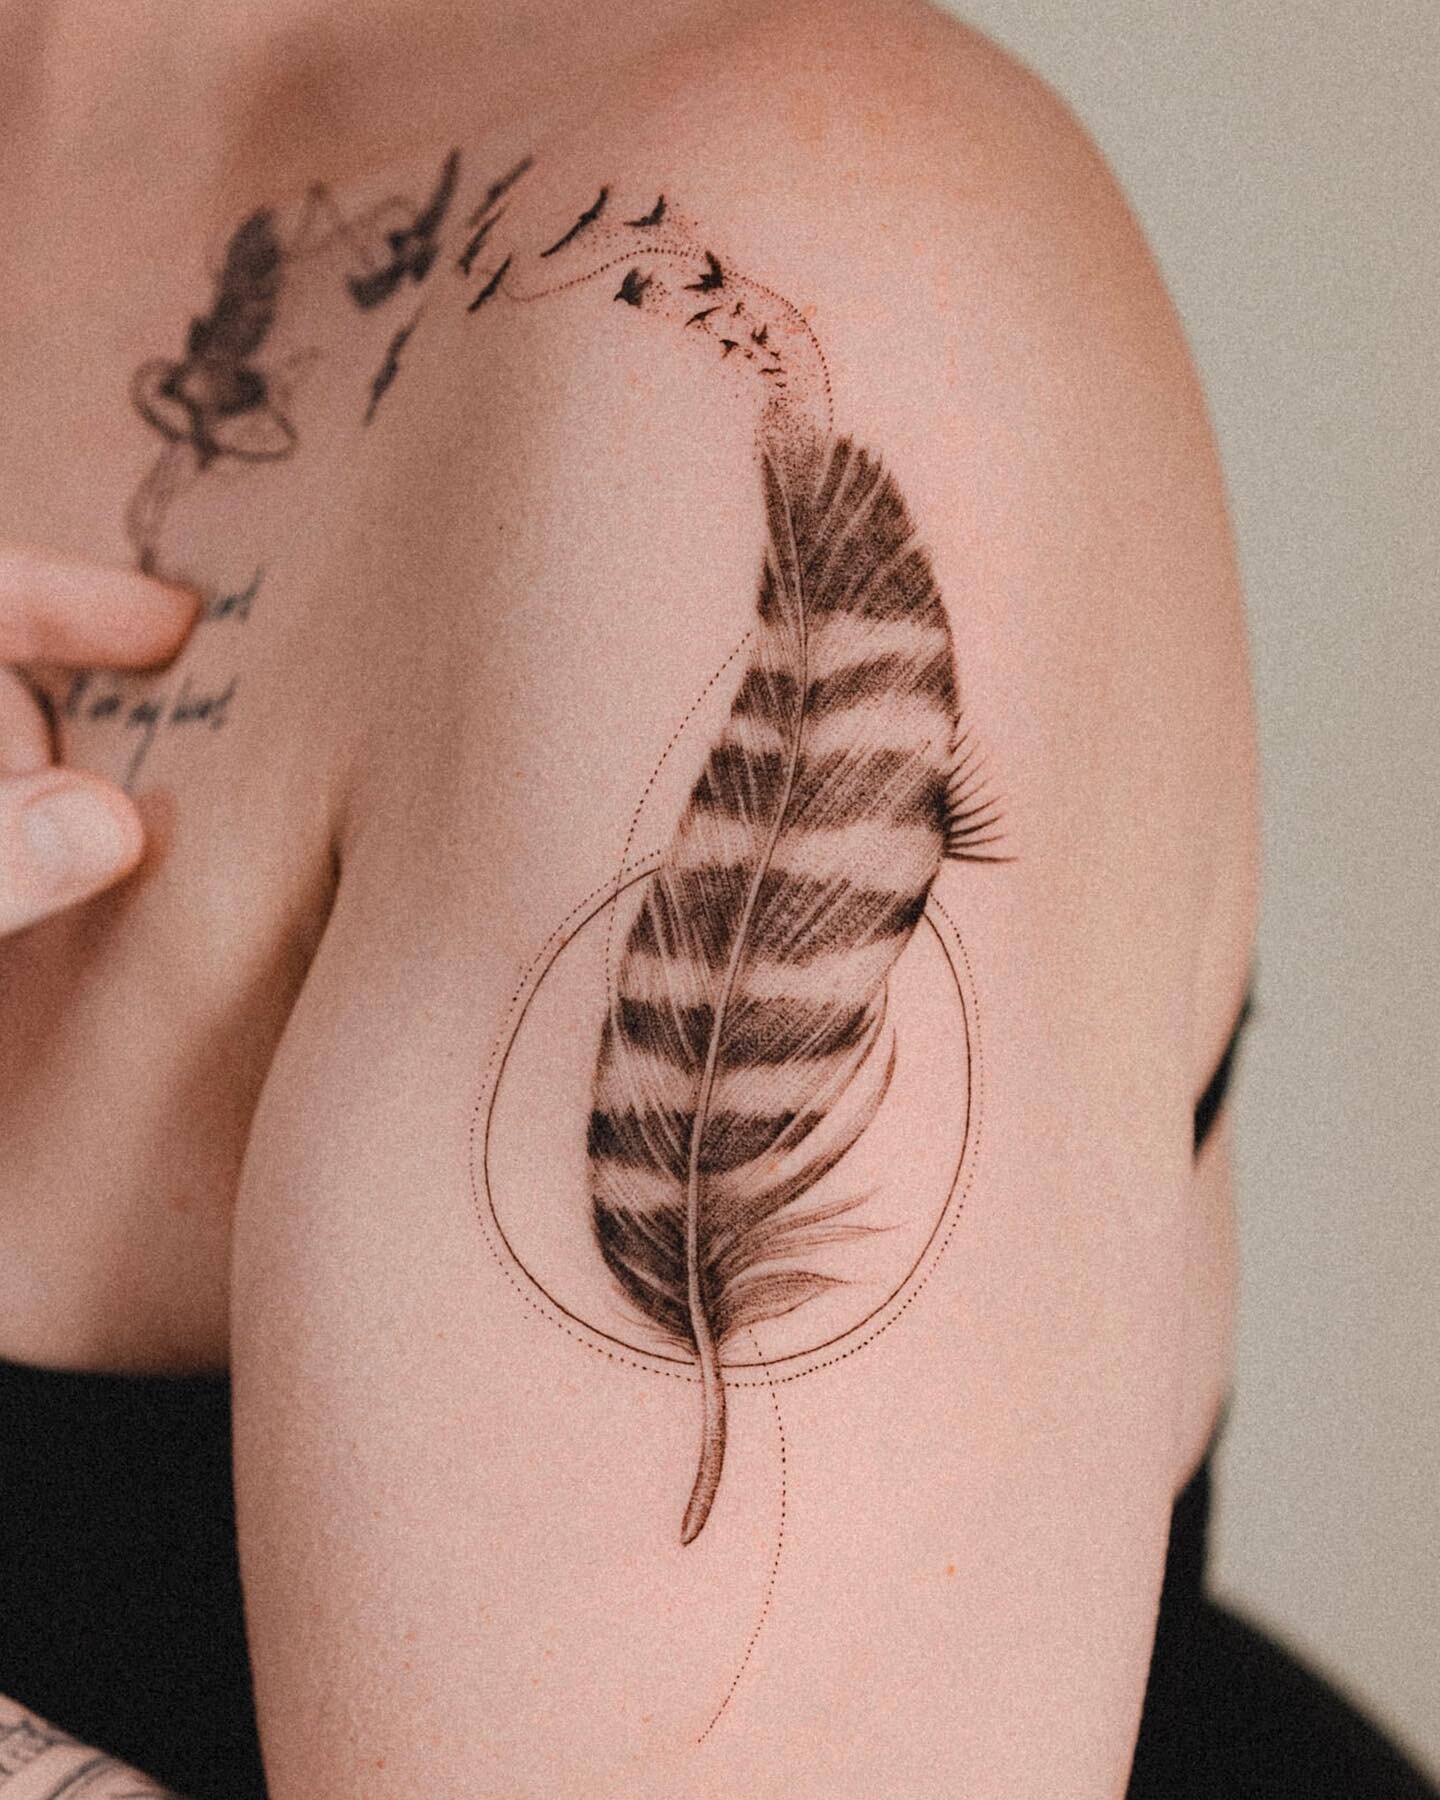 Flying Hawks from a feather on her shoulder🪶🦅✨@eggsy_tattoo _script not done by me_
Thank you Shannon !
.
📸 Photos by @jonnie.mang @henrymashera 
🖋️ Done at @inkandwatertattoo
.
.
#hawktattoo #eagletattoo #feathertattoo #tattoo #geometrictattoo #